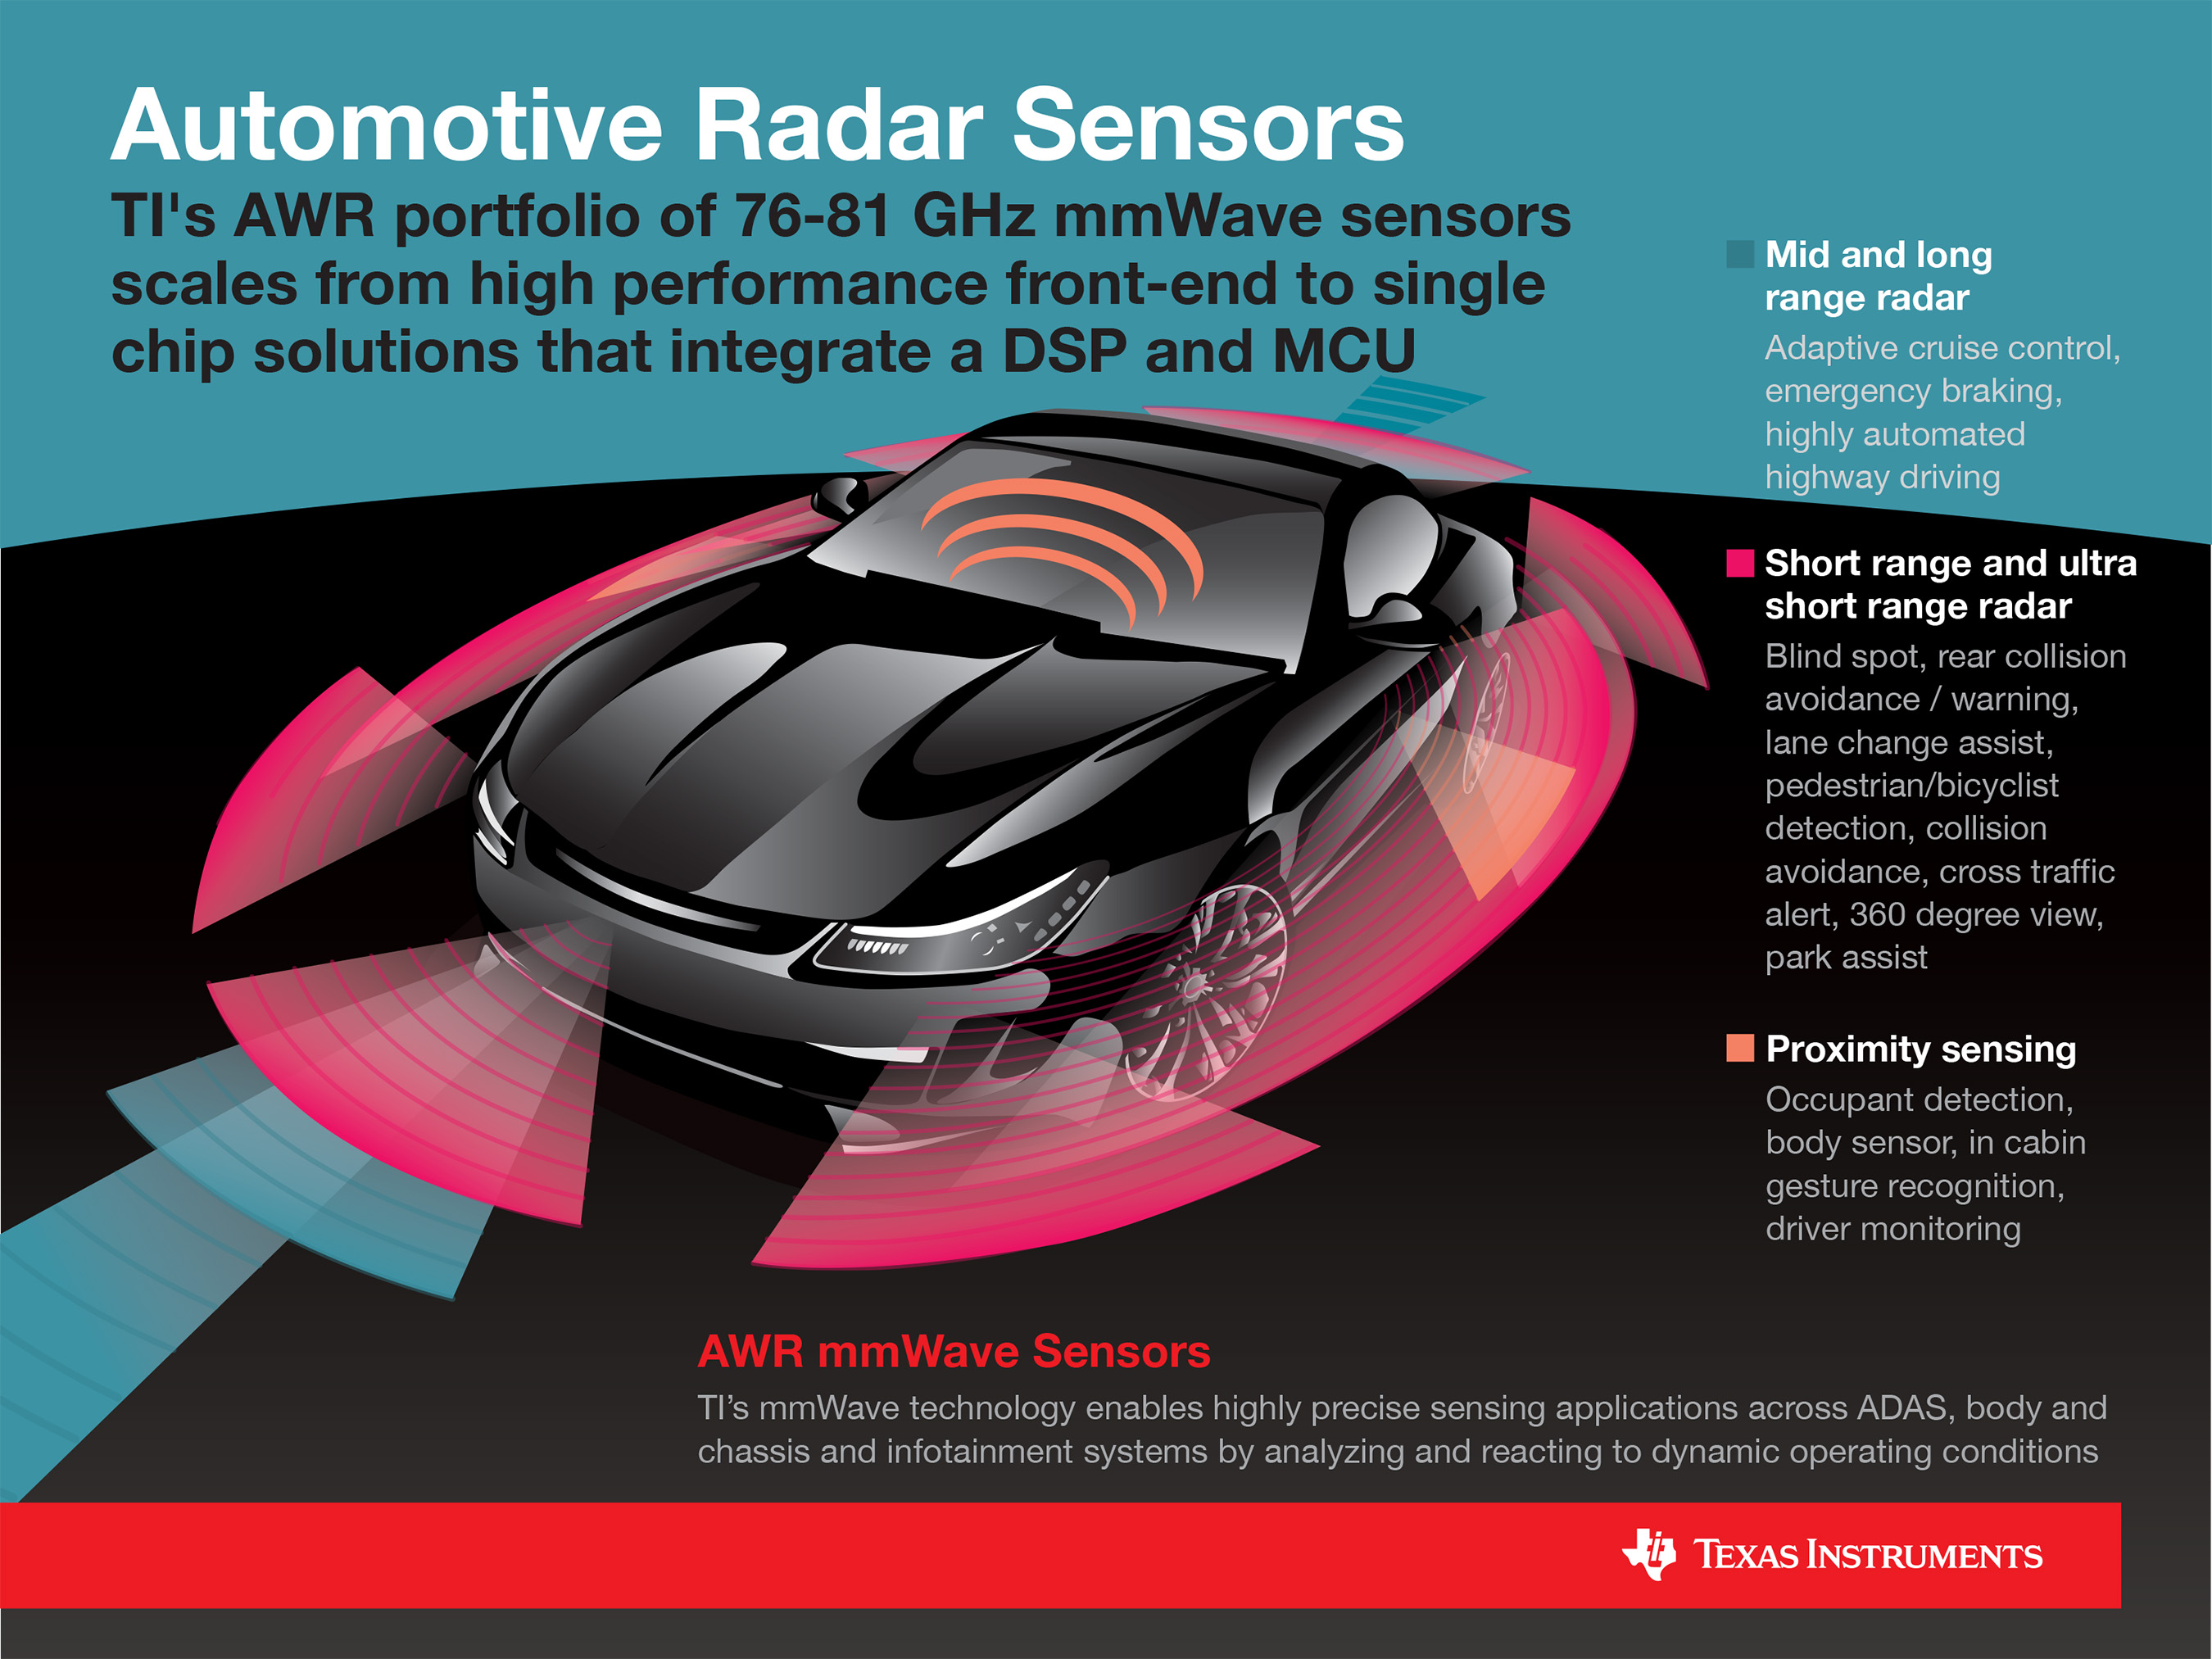 TI's AWR1x family of mmWave sensors enable highly precise sensing applications across ADAS, body and chassis and infotainment systems.